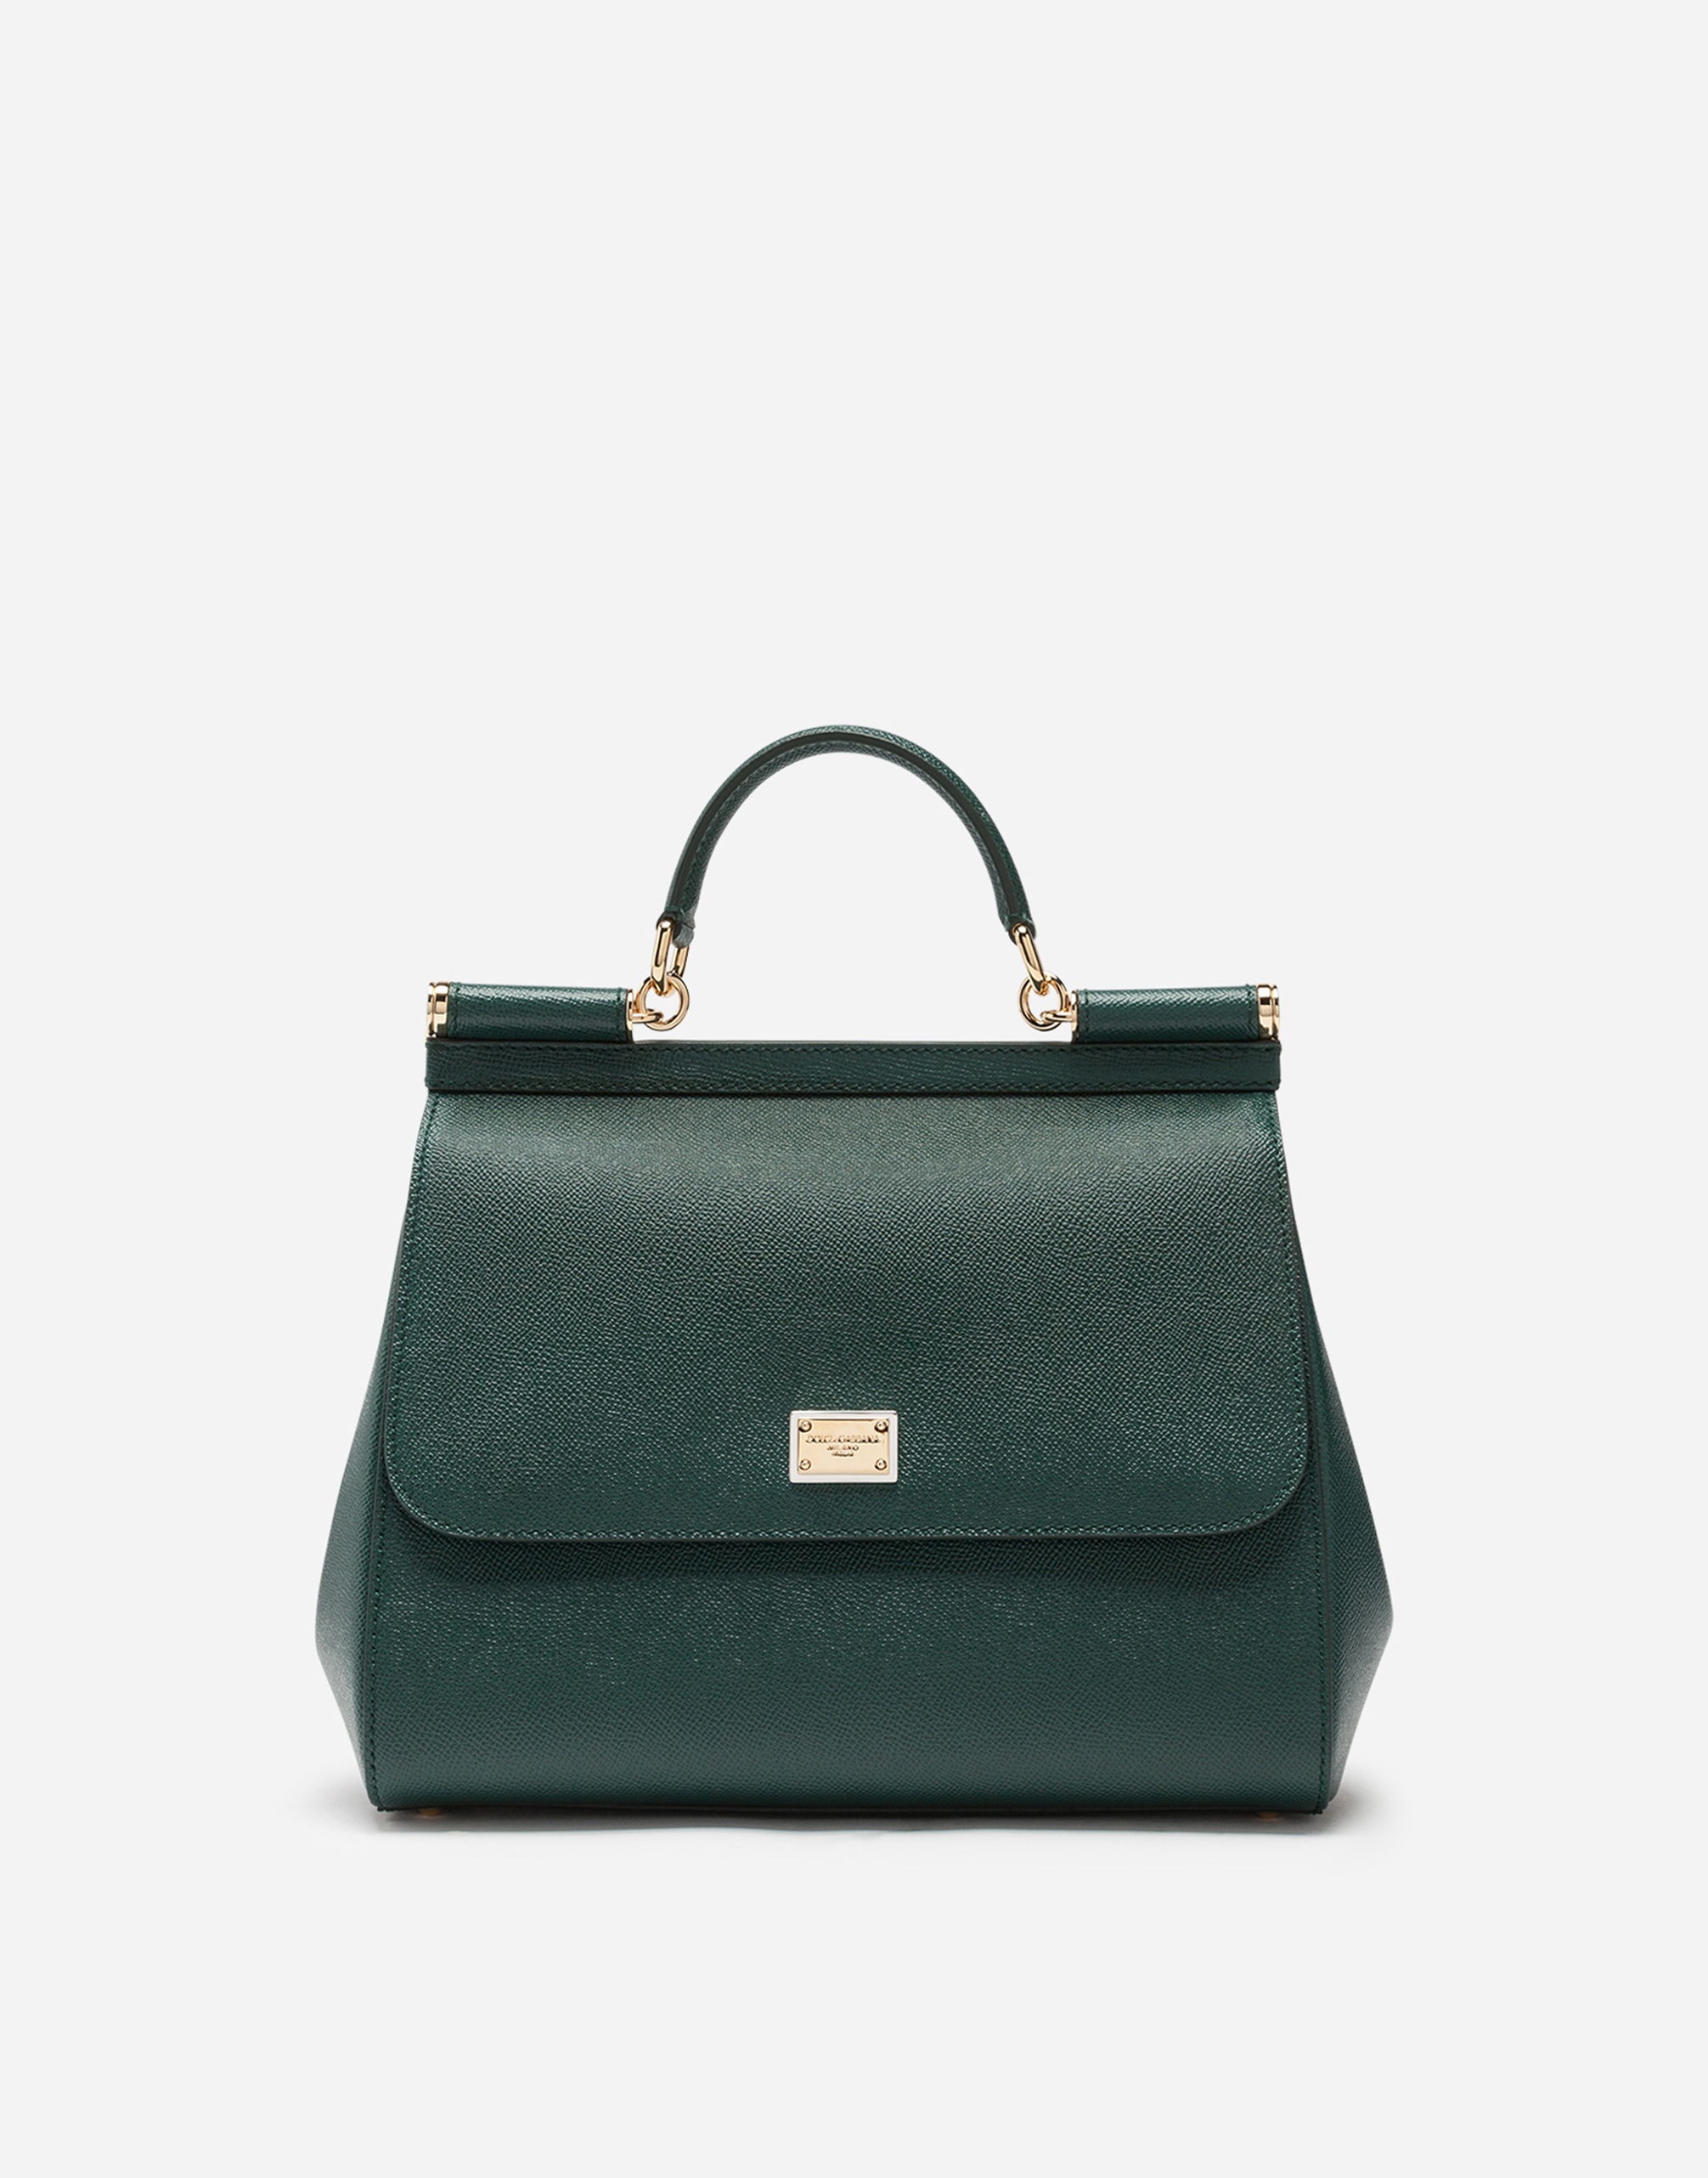 Regular Sicily bag in dauphine leather in Green